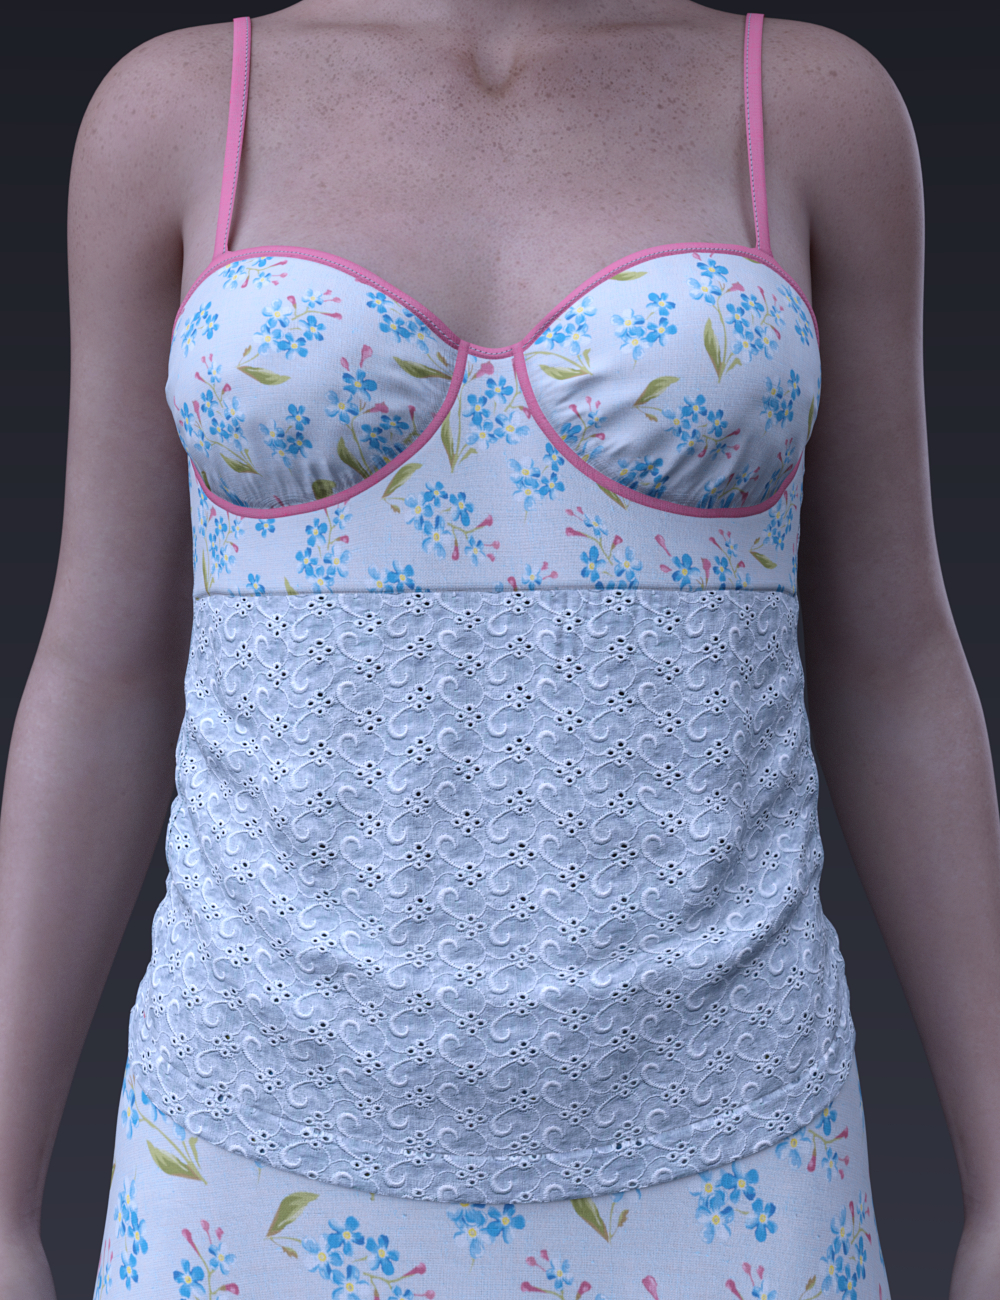 dForce Fleur Farouche Outfit for Genesis 8 and 8.1 Females by: Leviathan, 3D Models by Daz 3D